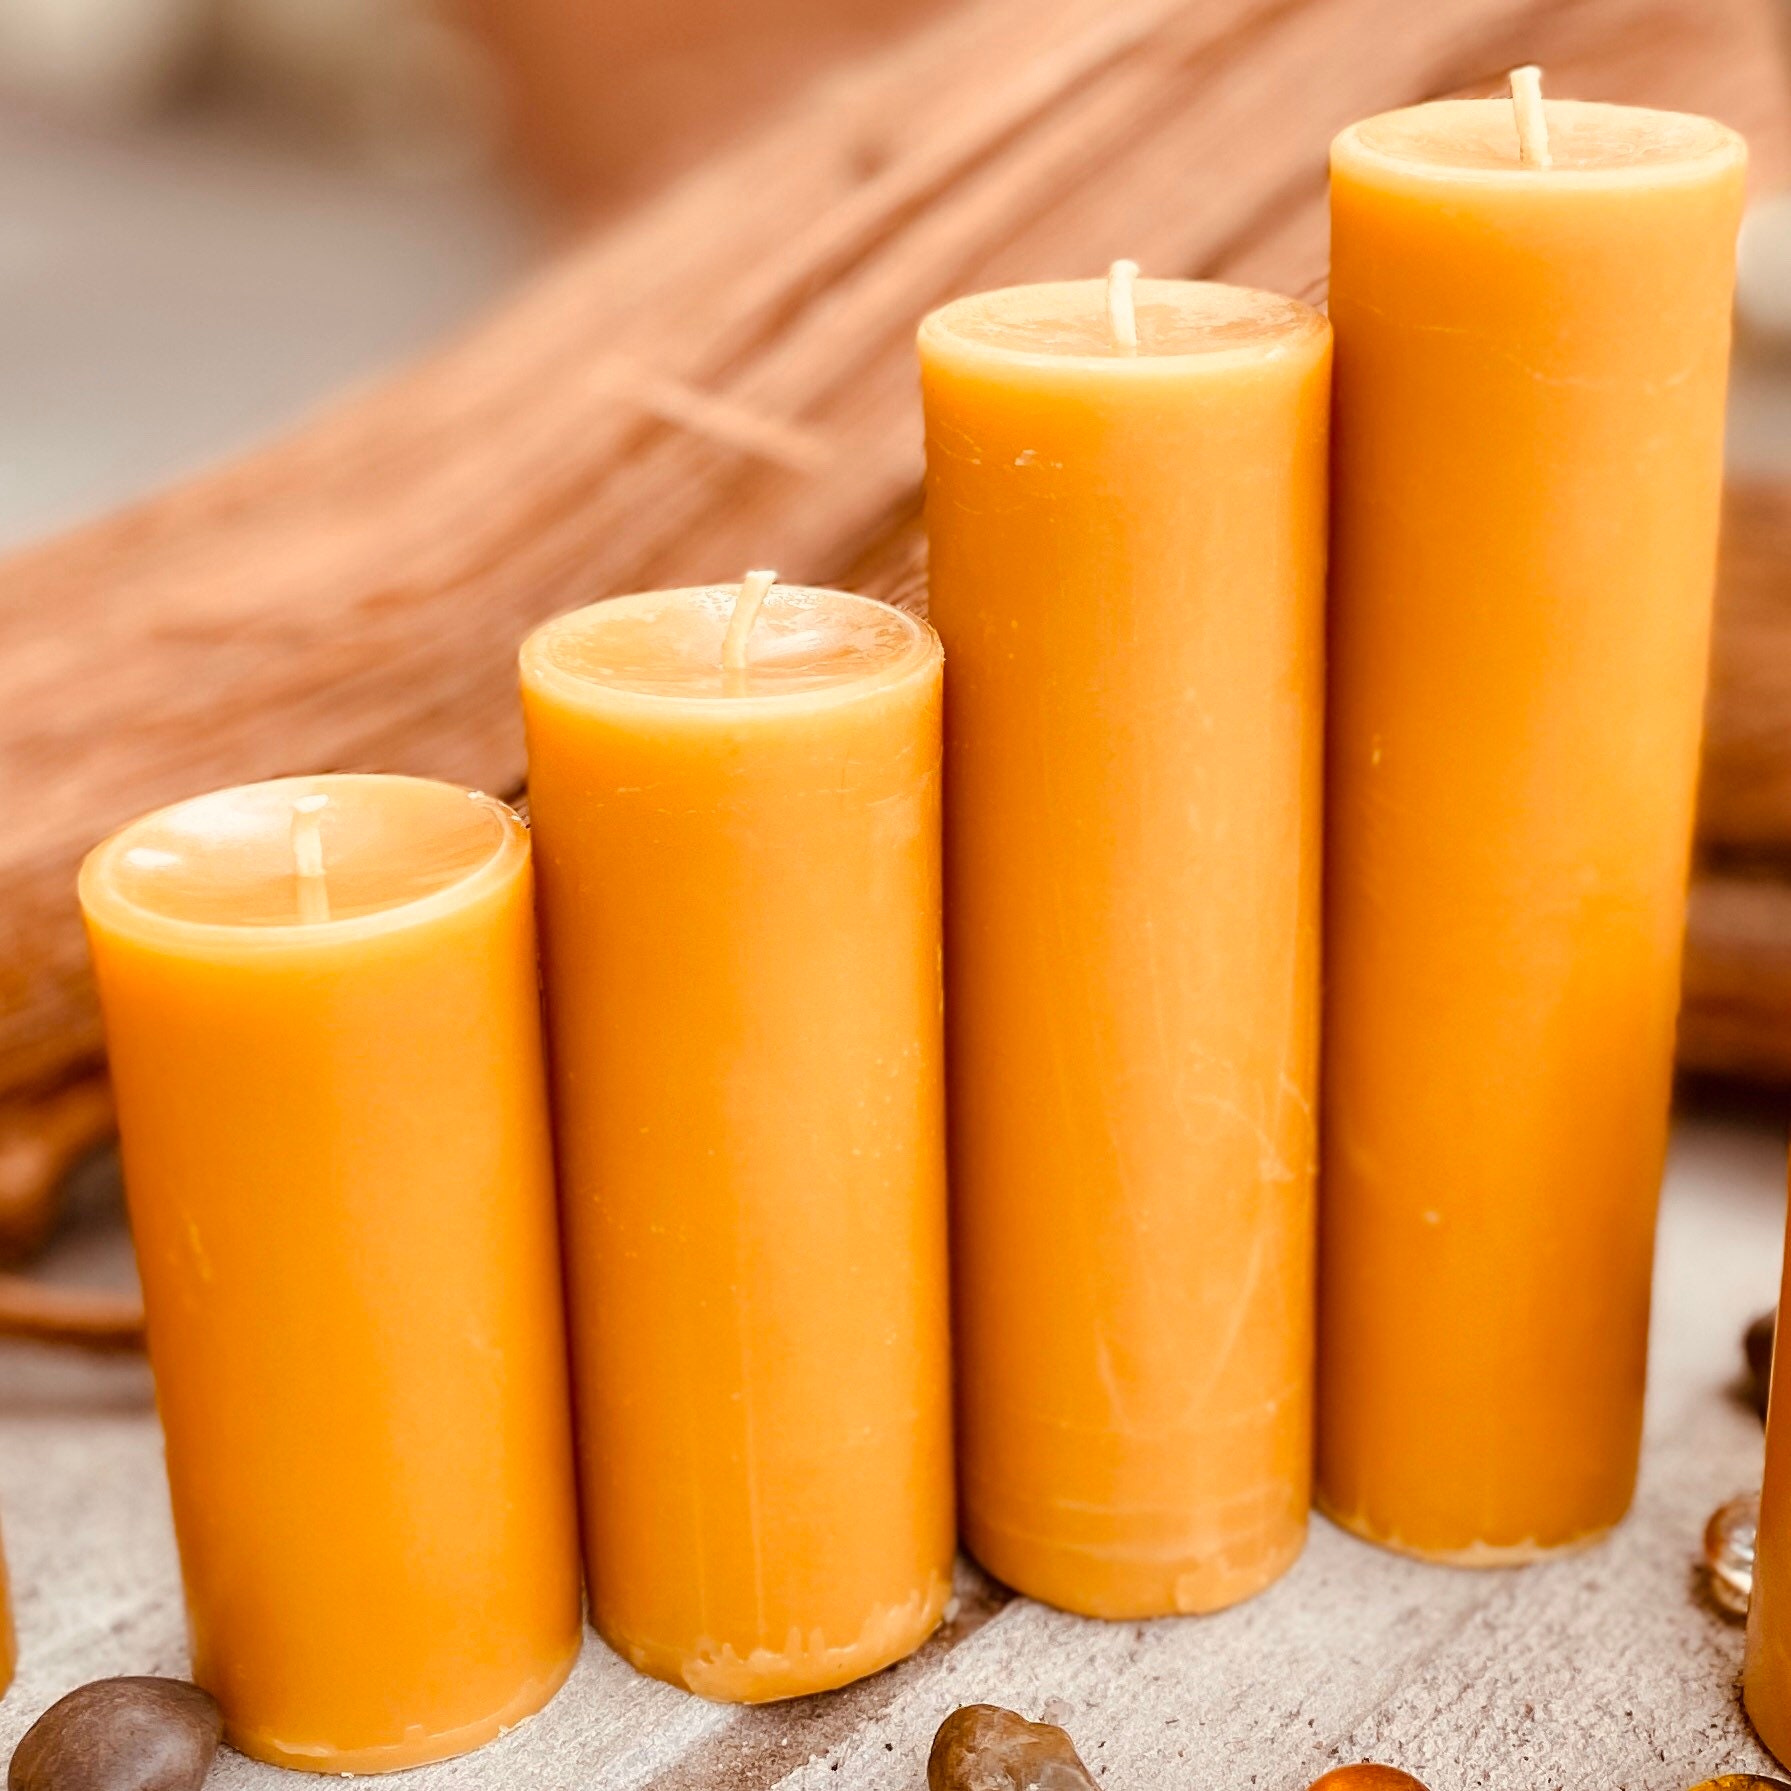 4″ Pure Beeswax Rolled Pillar Candle